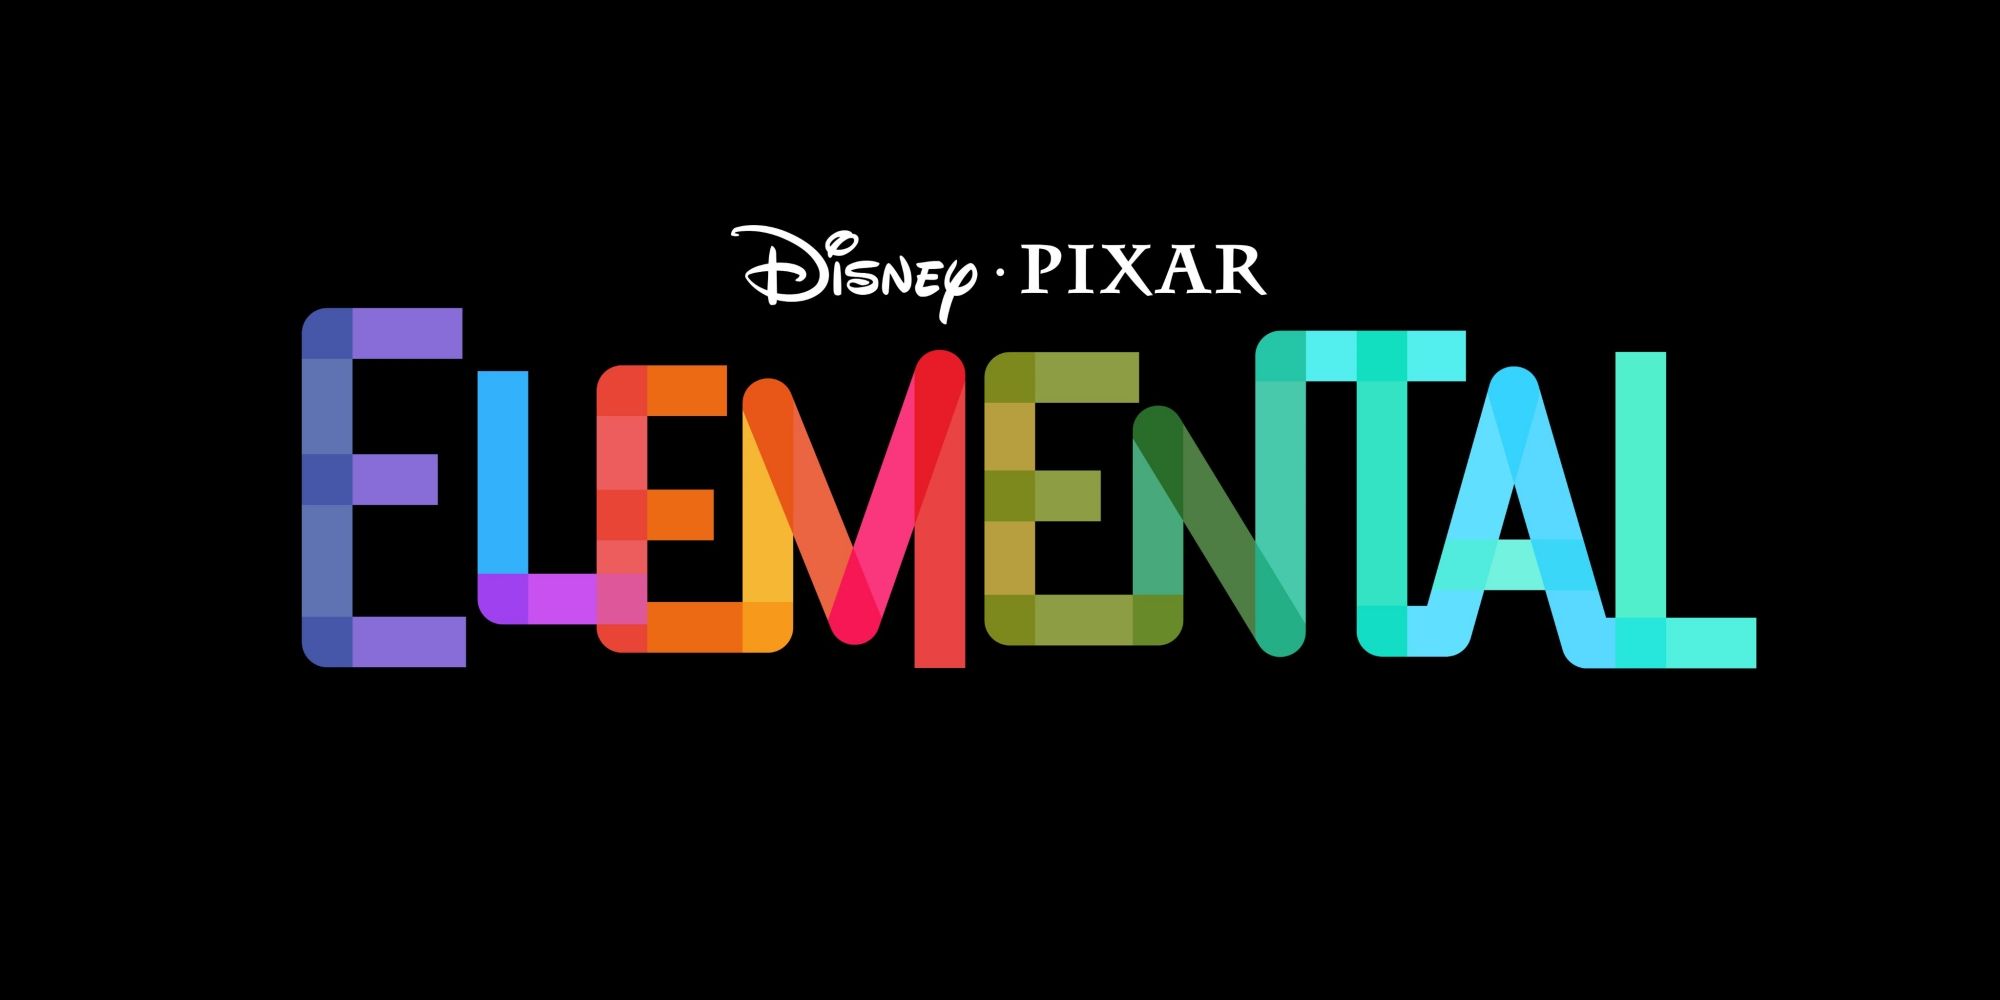 A logo for Pixar's Elemental with a black background.